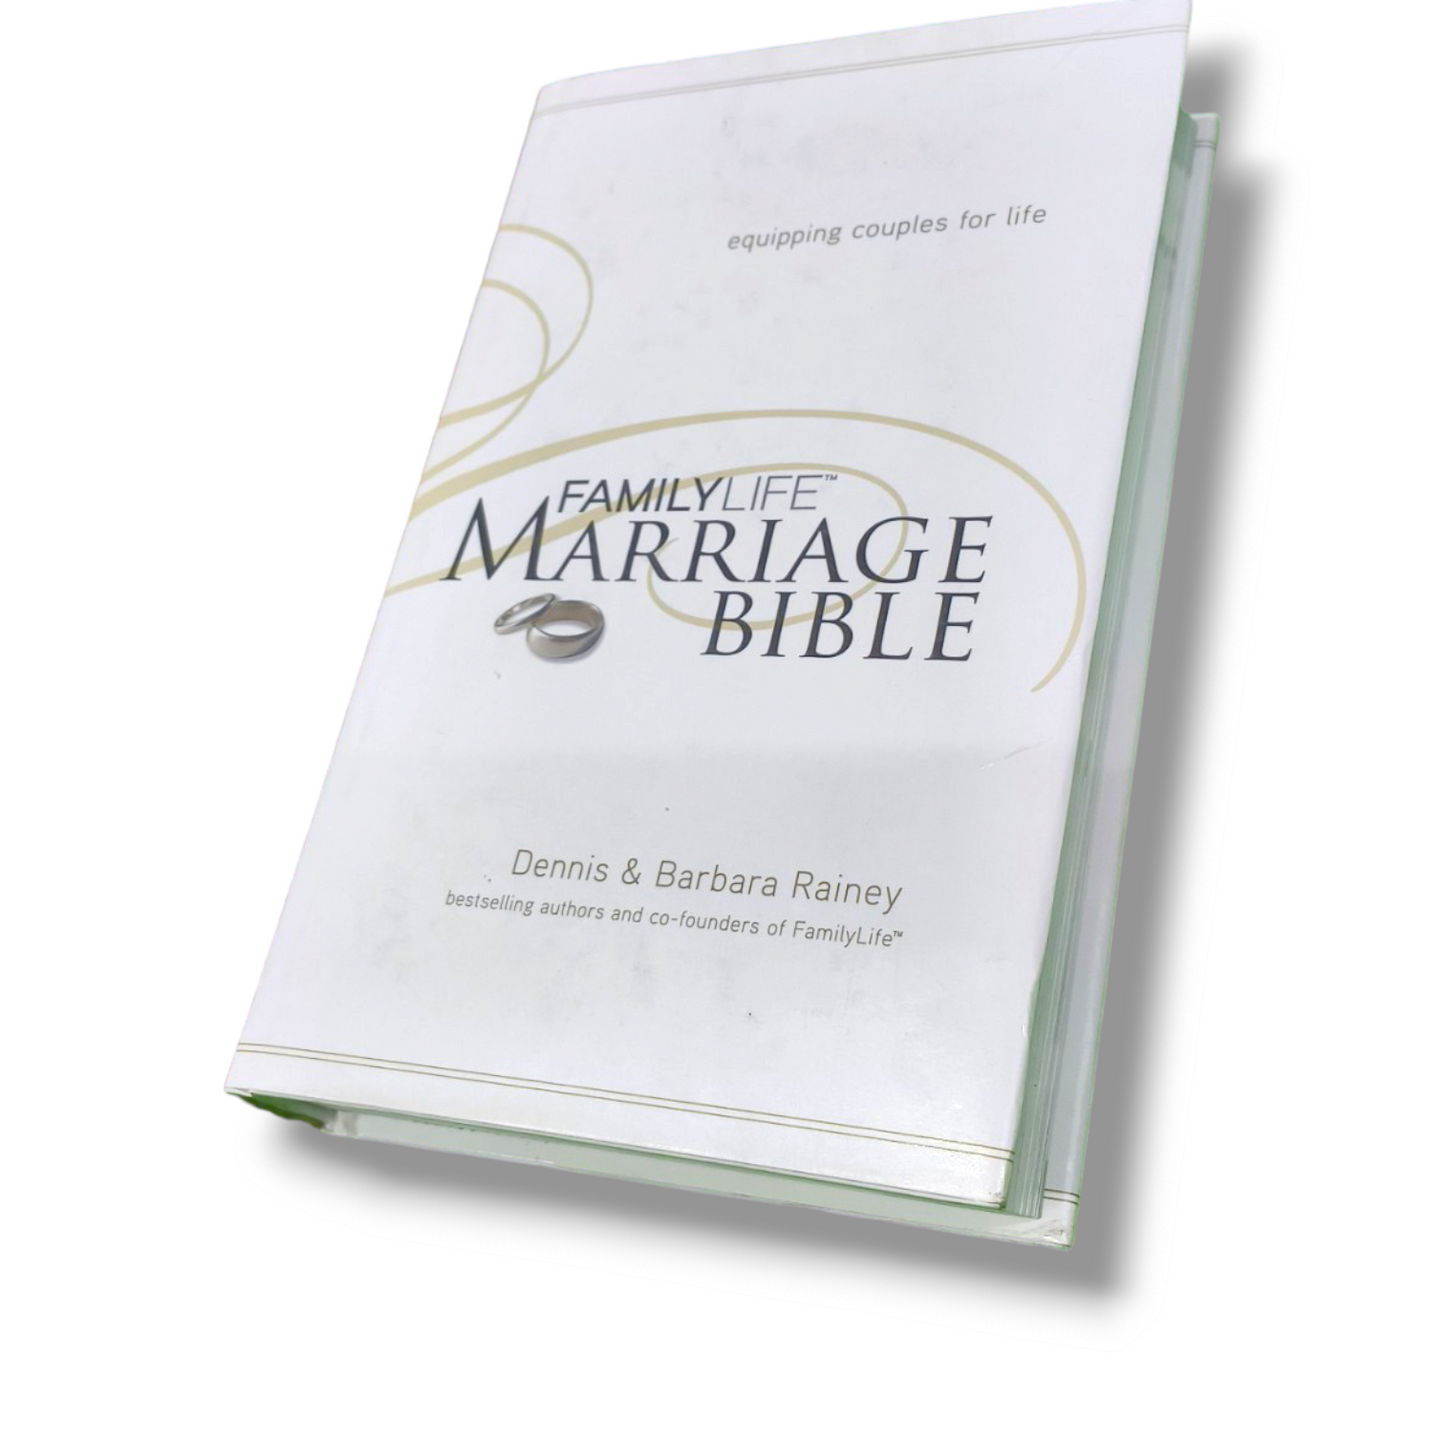 NKJV Family Life Marriage Bible | Hardcover Edition Equipping Couples for Life | Study Bible | New Edition